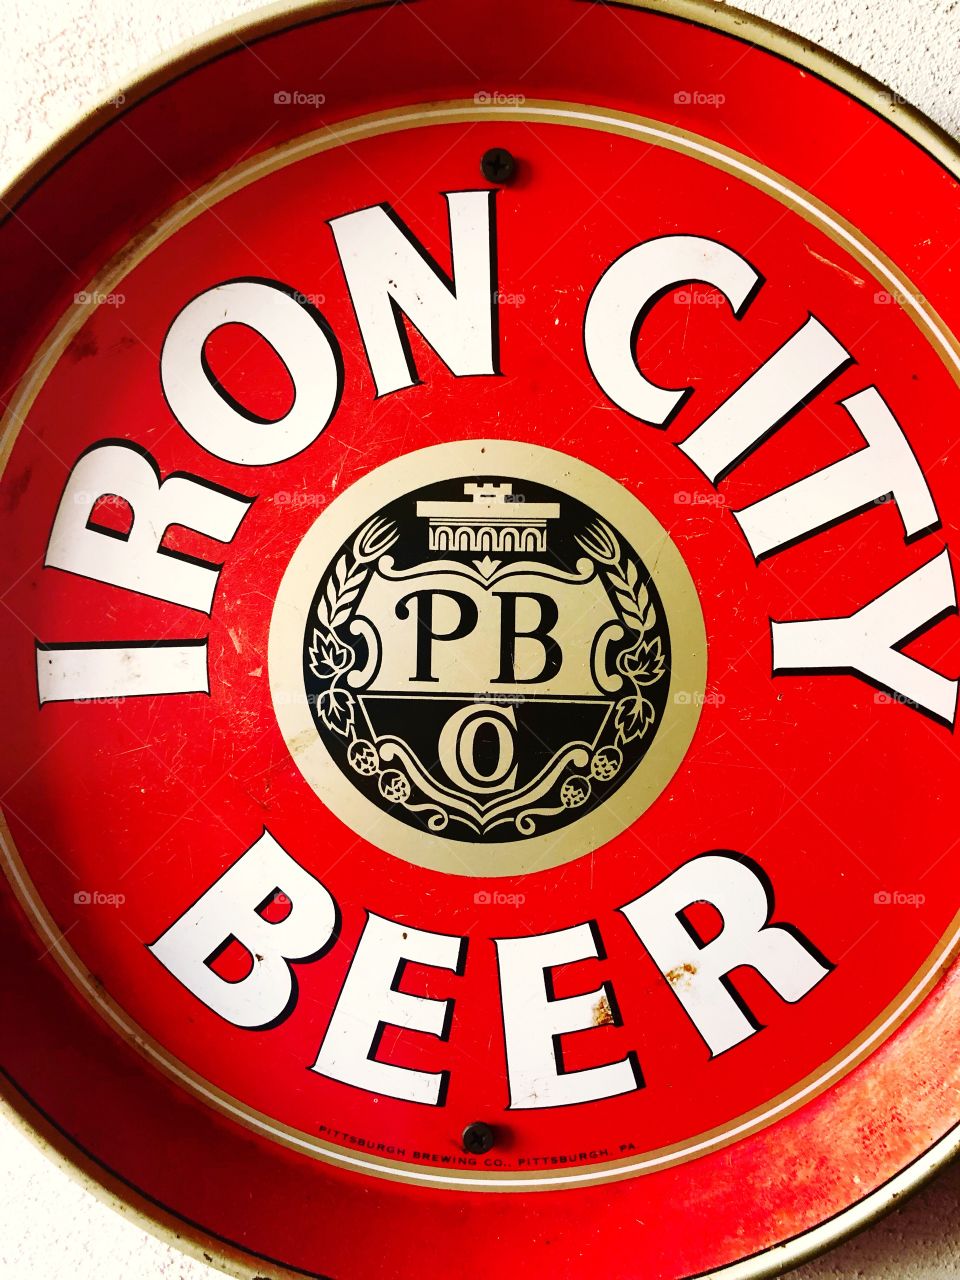 A vintage Iron City Beer tray.